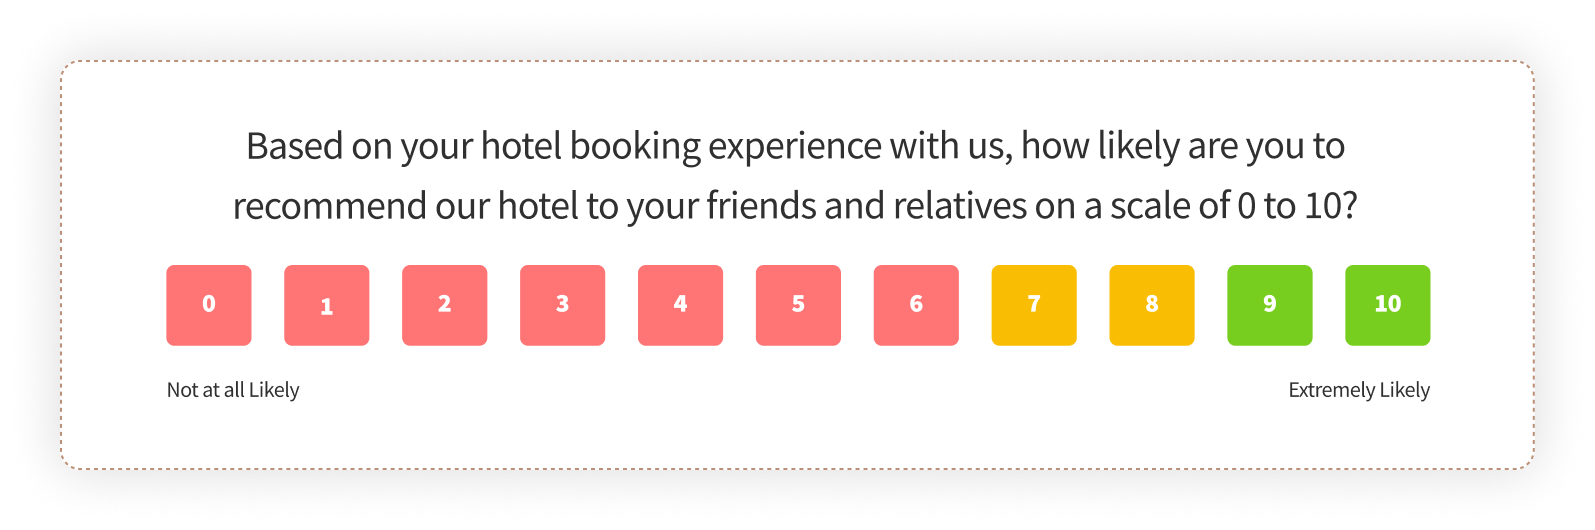 Hotel Survey Questions on Room Booking